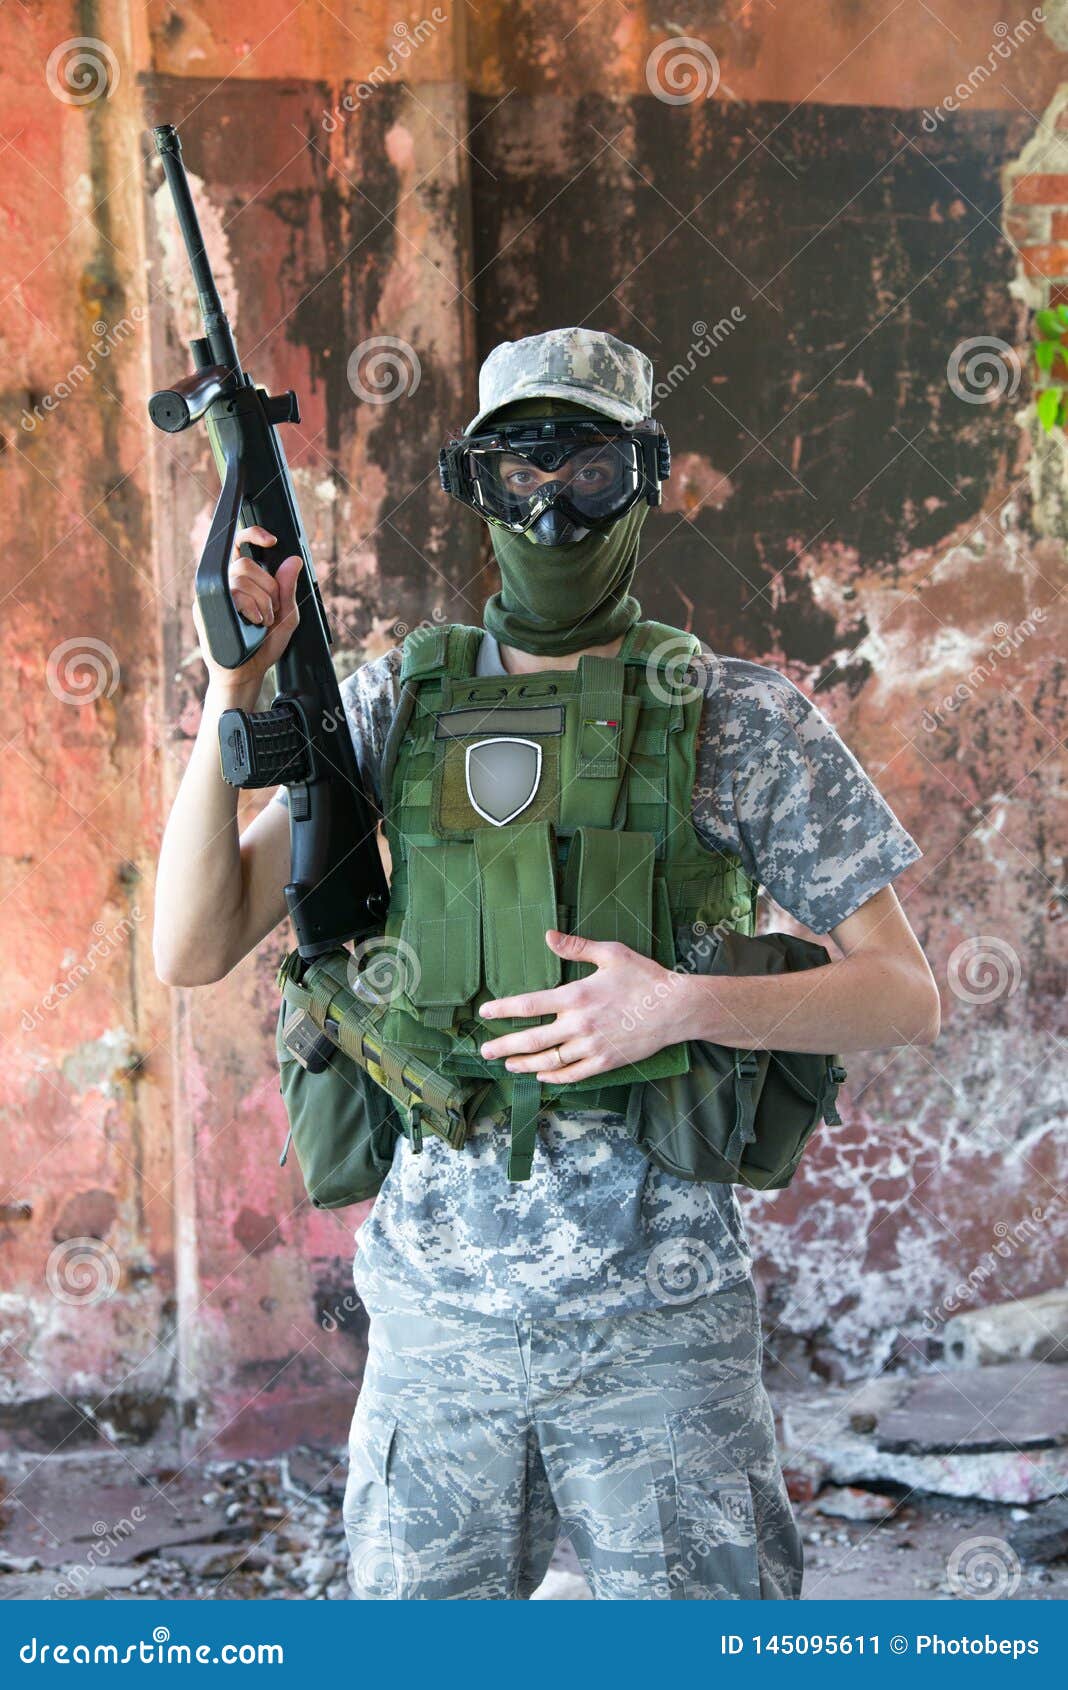 Soldier in a war situation stock image. Image of ruins - 145095611